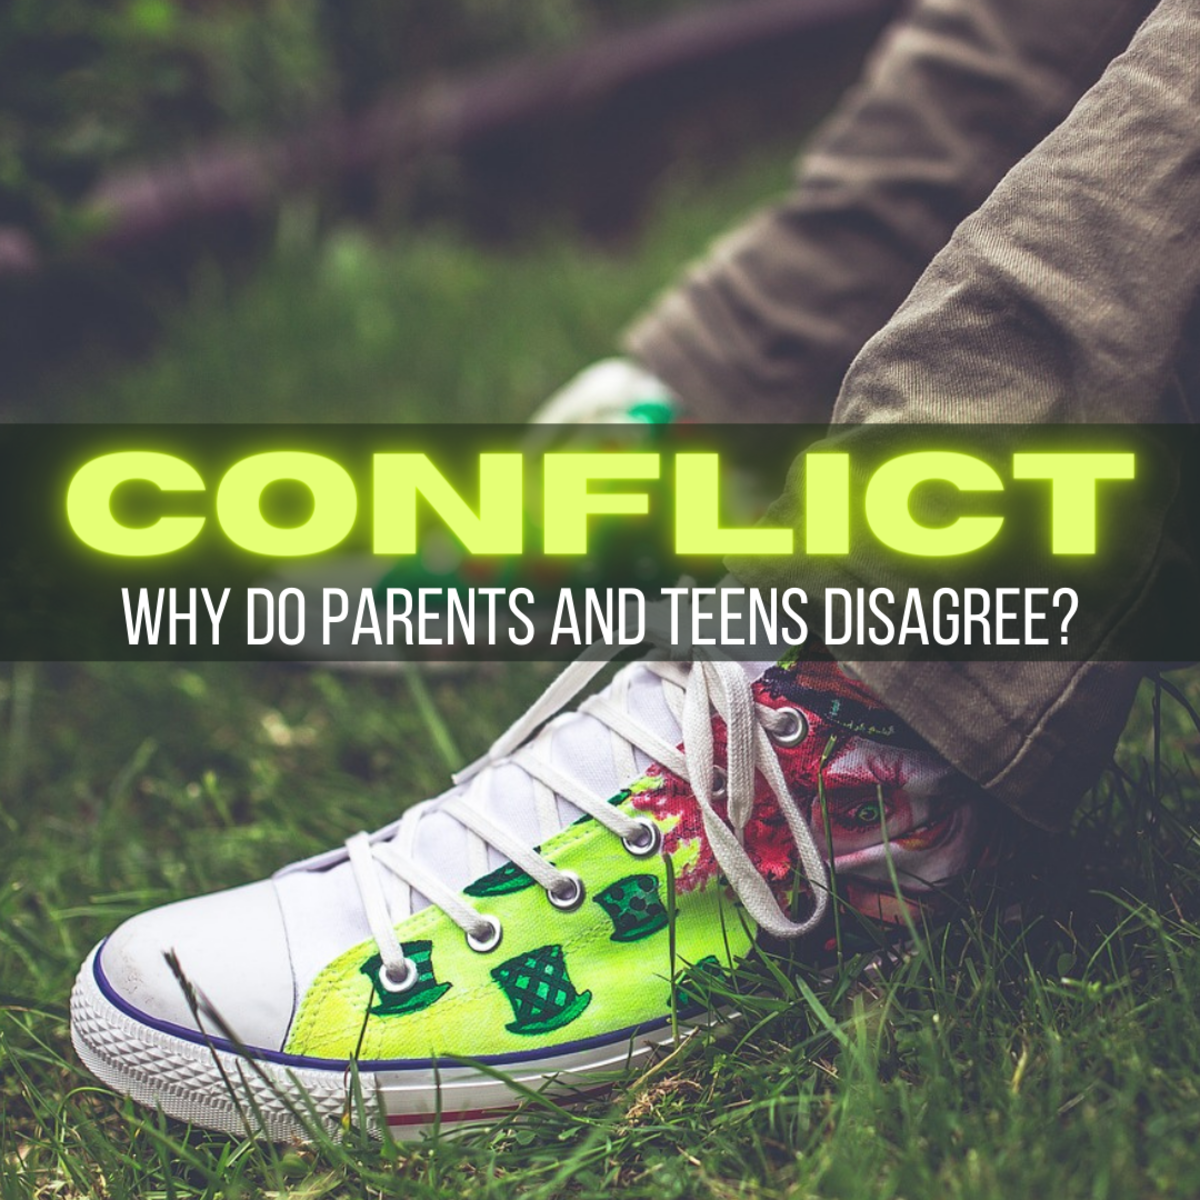 Parents and teenagers may argue over a variety of topics, from clothes and curfew to spending money. Discover some sources of parent-teen conflict and some methods for resolving problems.